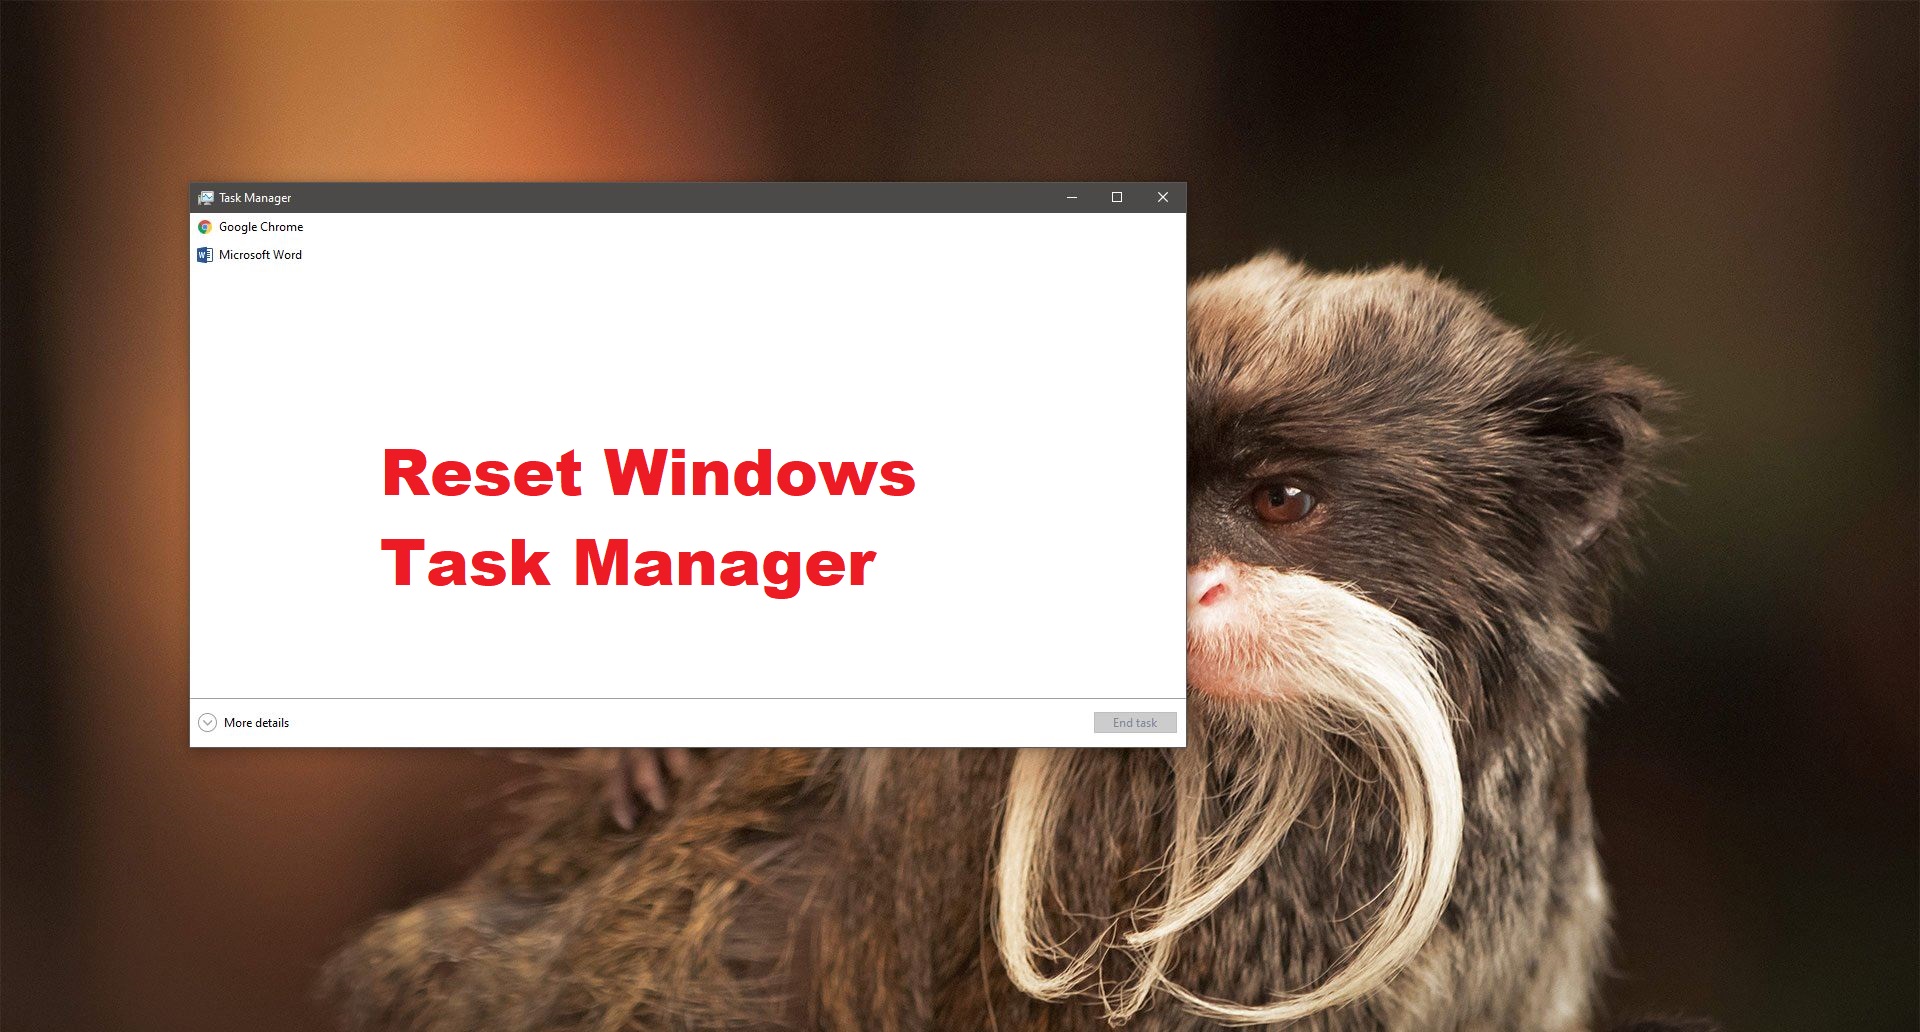 How to Reset Windows Task Manager to Default settings?